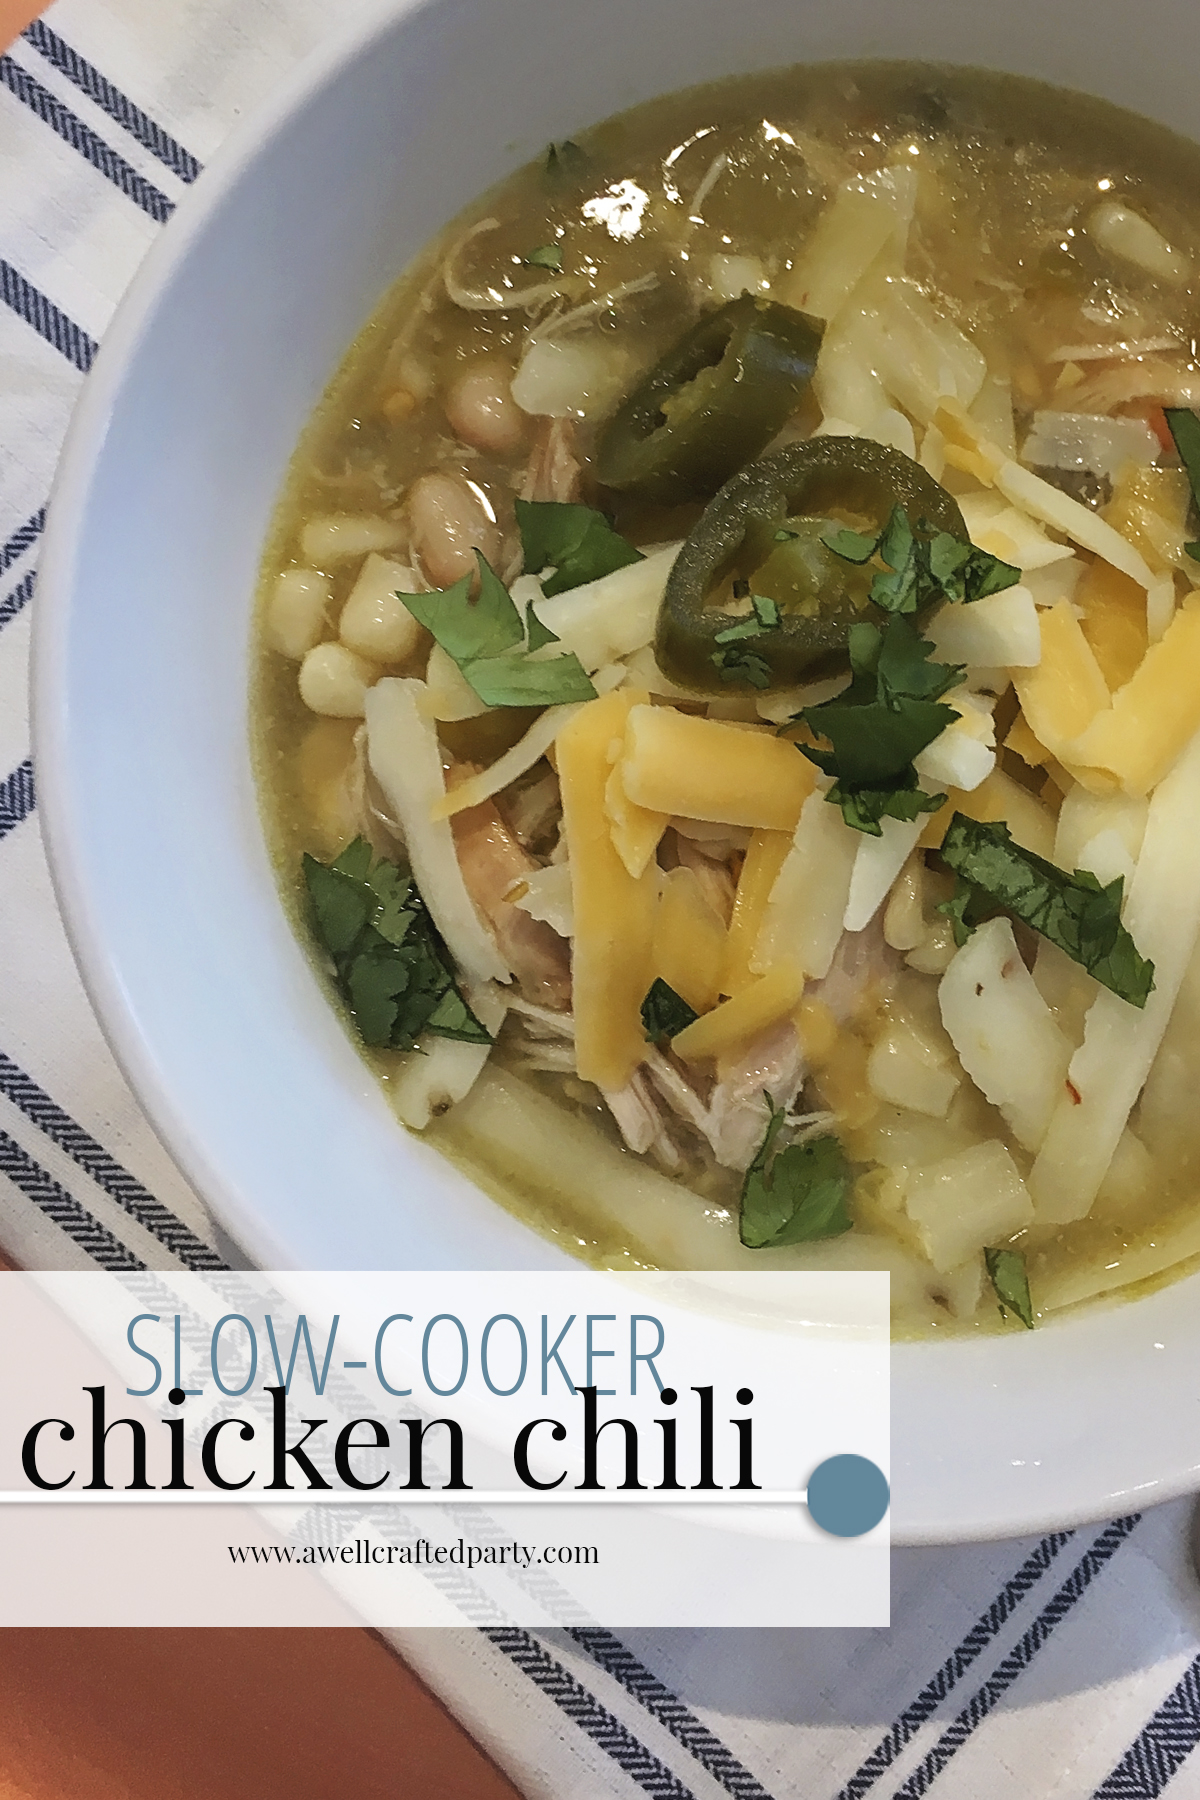 Slow Cooker Chicken Chili - A Well Crafted Party